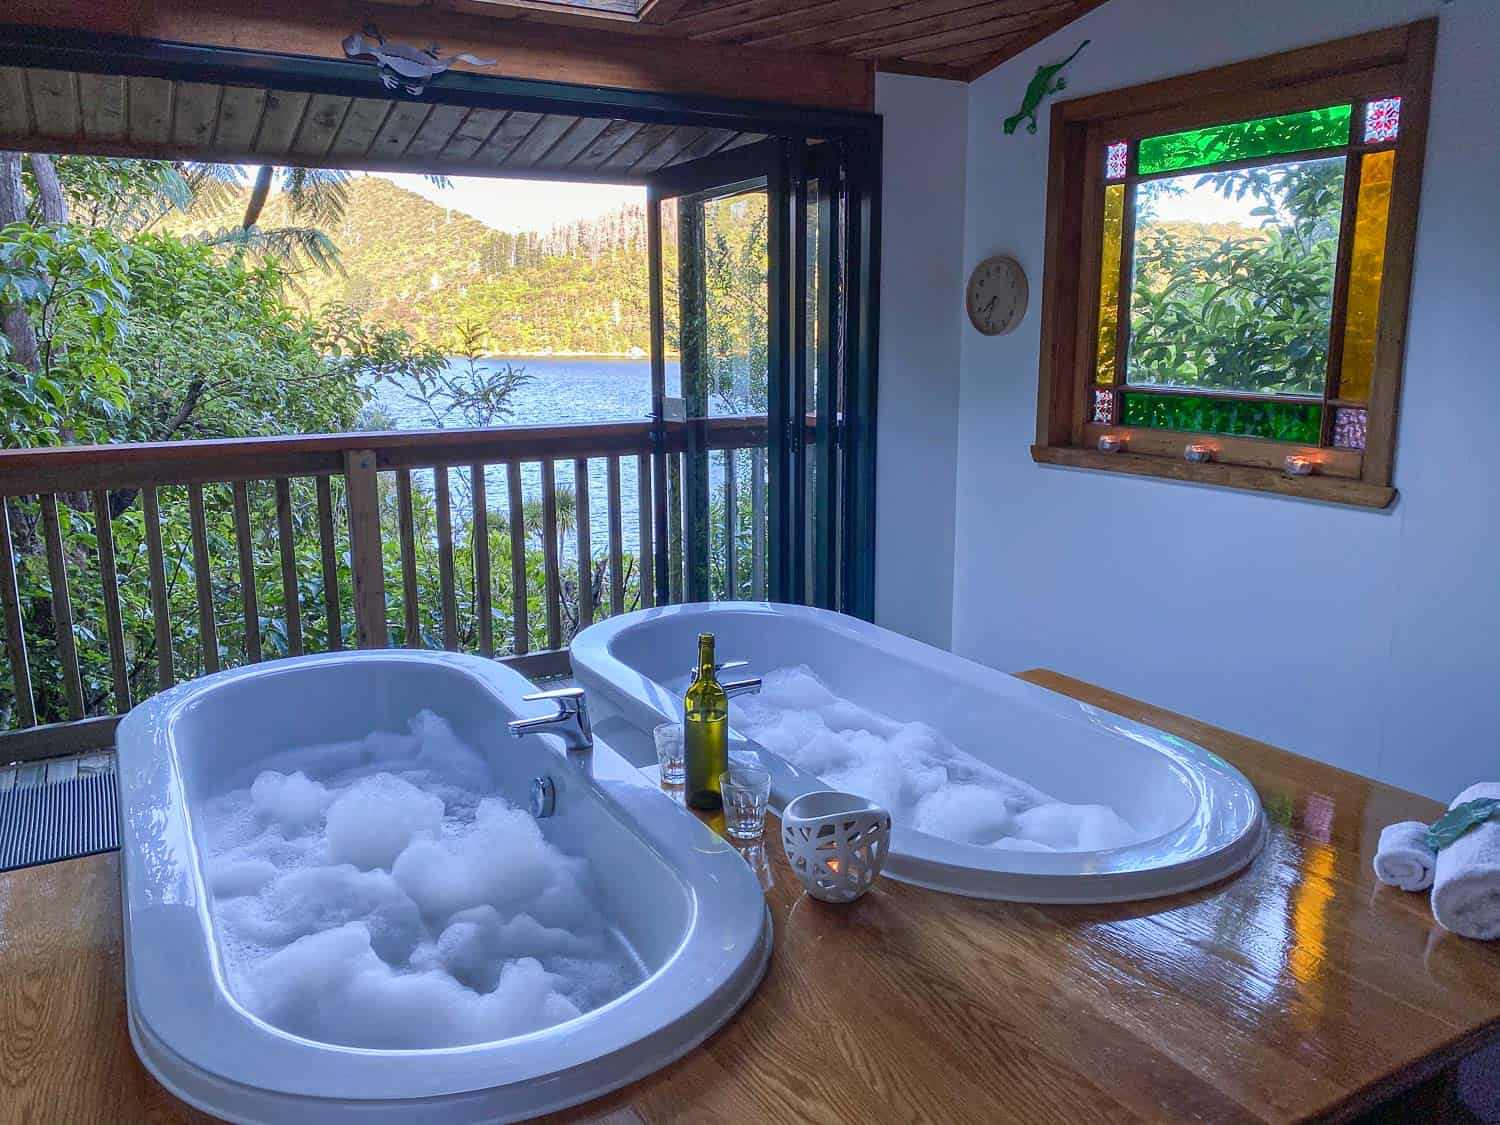 Side by side bubble baths in the private bathhouse at Lochmara Lodge in the Marlborough Sounds